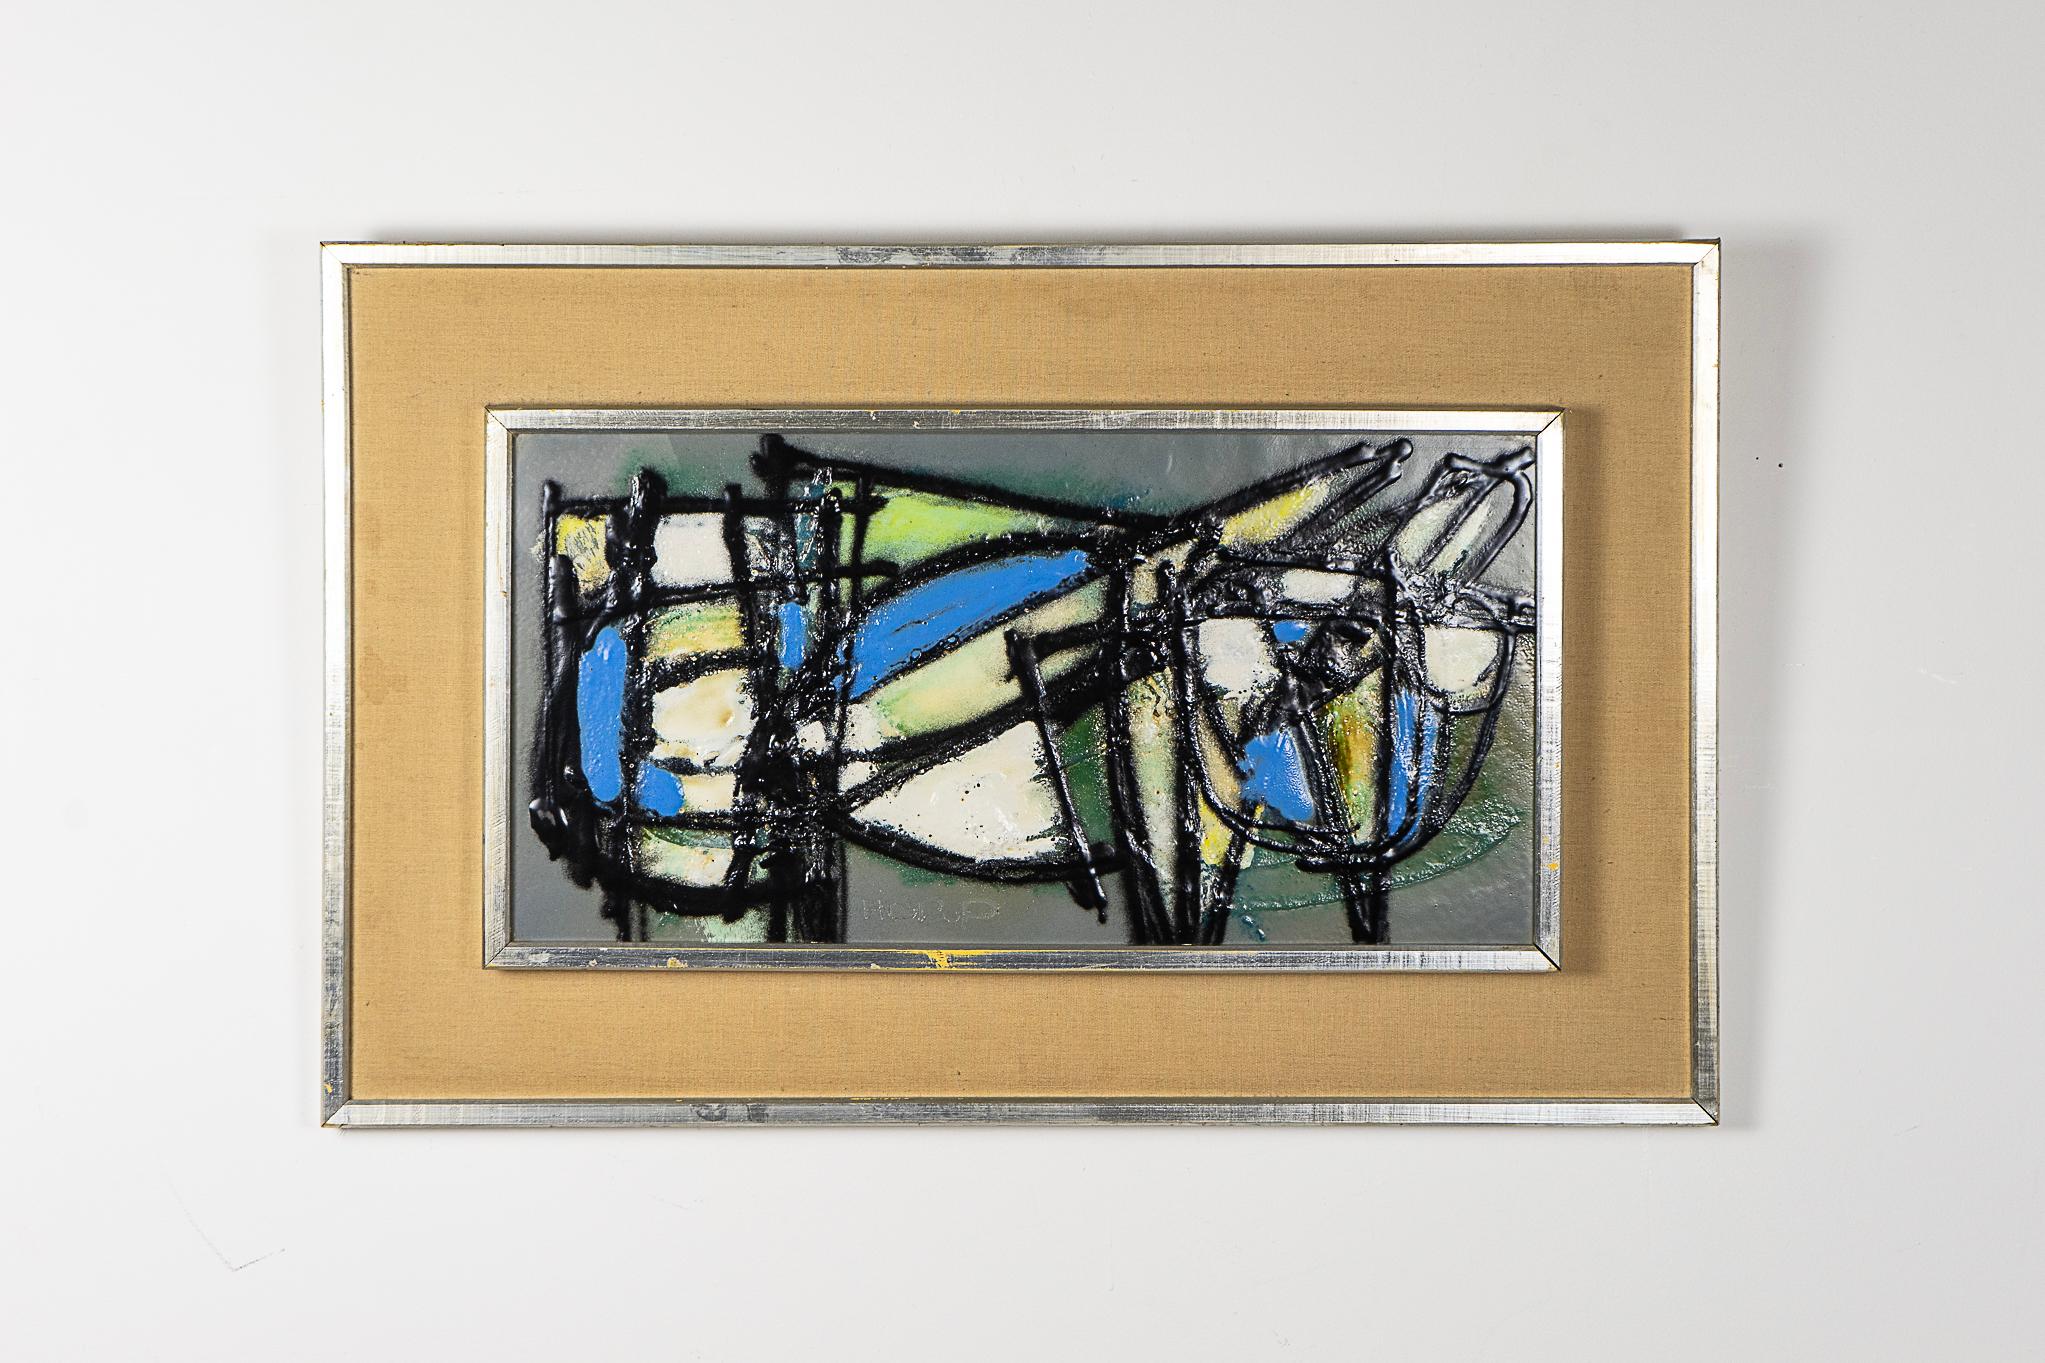 Ceramic Danish wall art by Knud Horup, circa 1960s. Incredibly unique beautiful abstract motif with lots of texture. Robust double frame, a statement piece!

Please inquire for international and remote shipping rates.